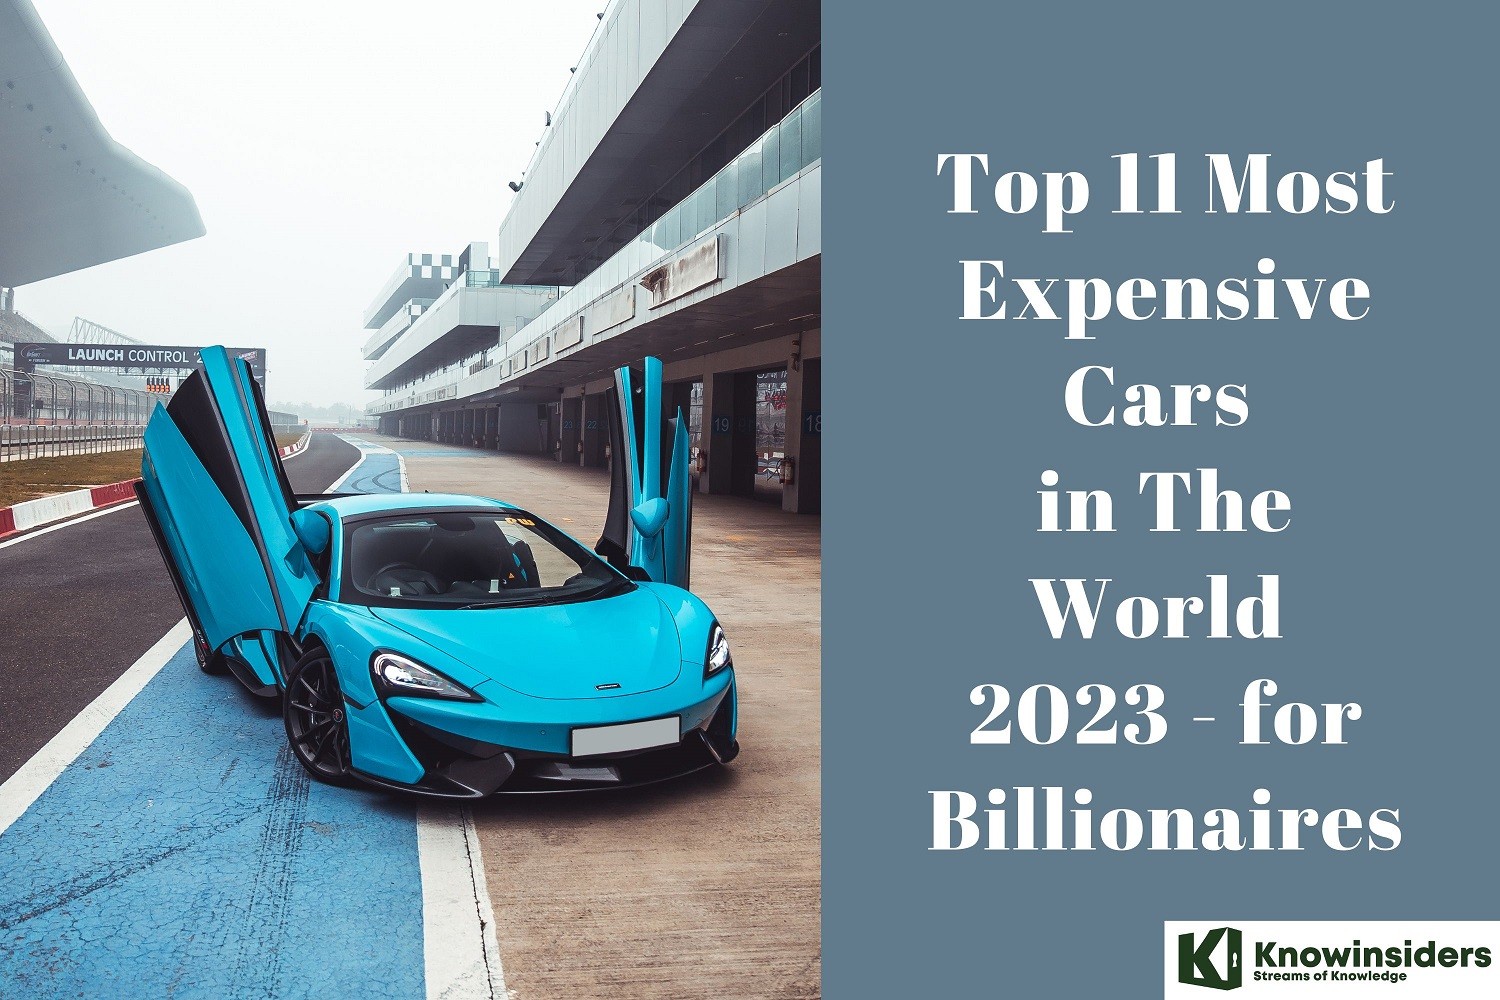 Top 11 Most Expensive Cars in The World 2023 for Billionaires